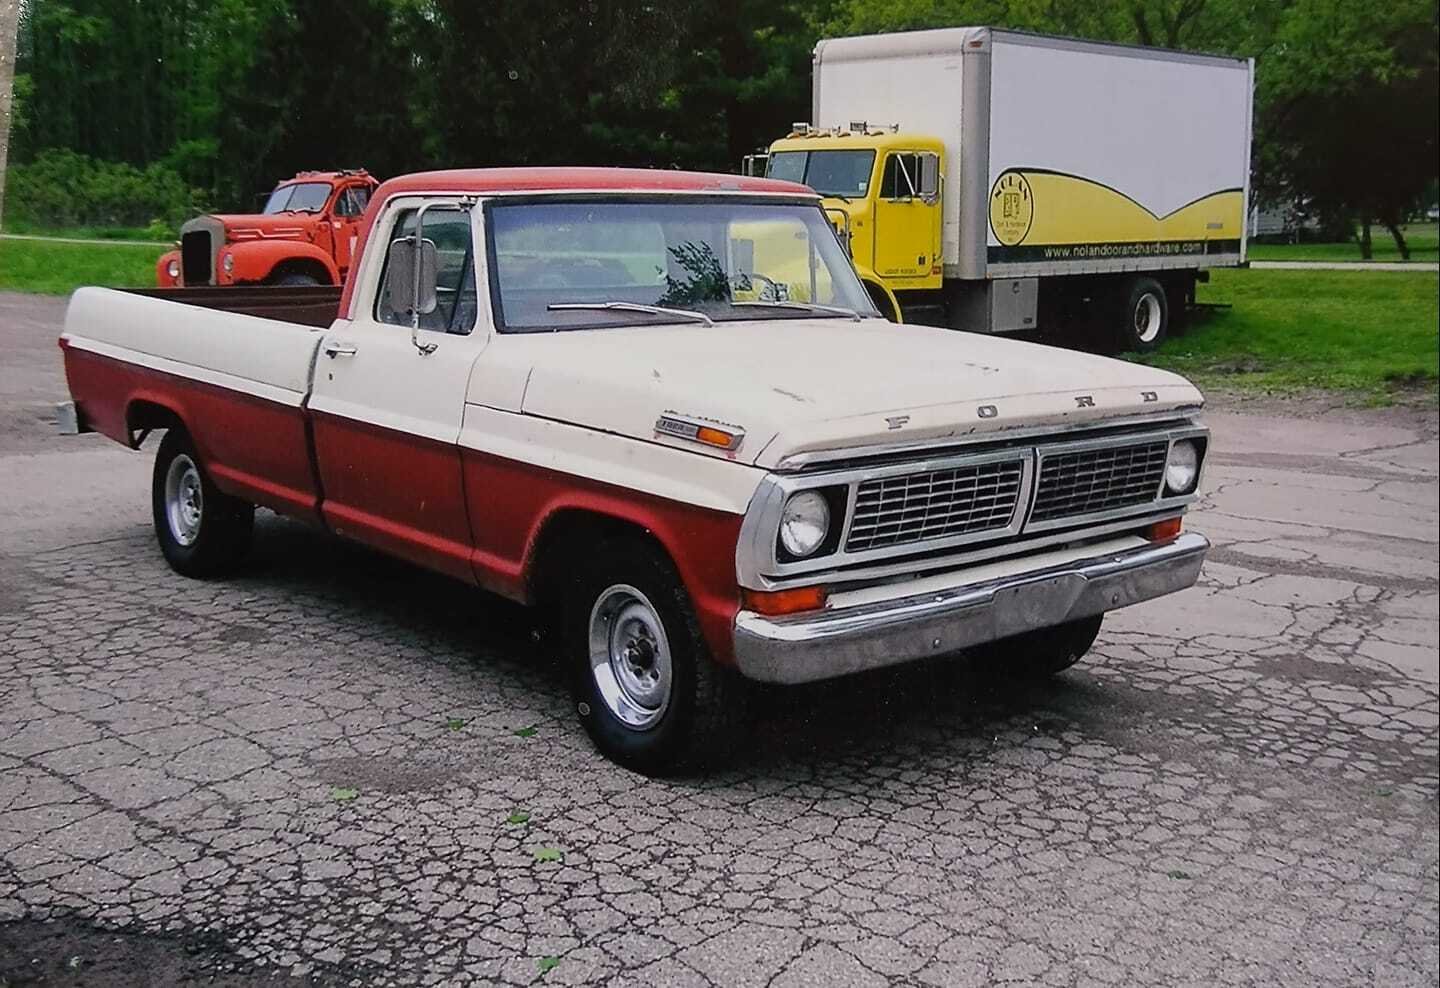 Rob Aichele did a lot of restoration on the F-100 Ford, including giving it a new paint job. This is the truck before Aichele received it in November of 2020.